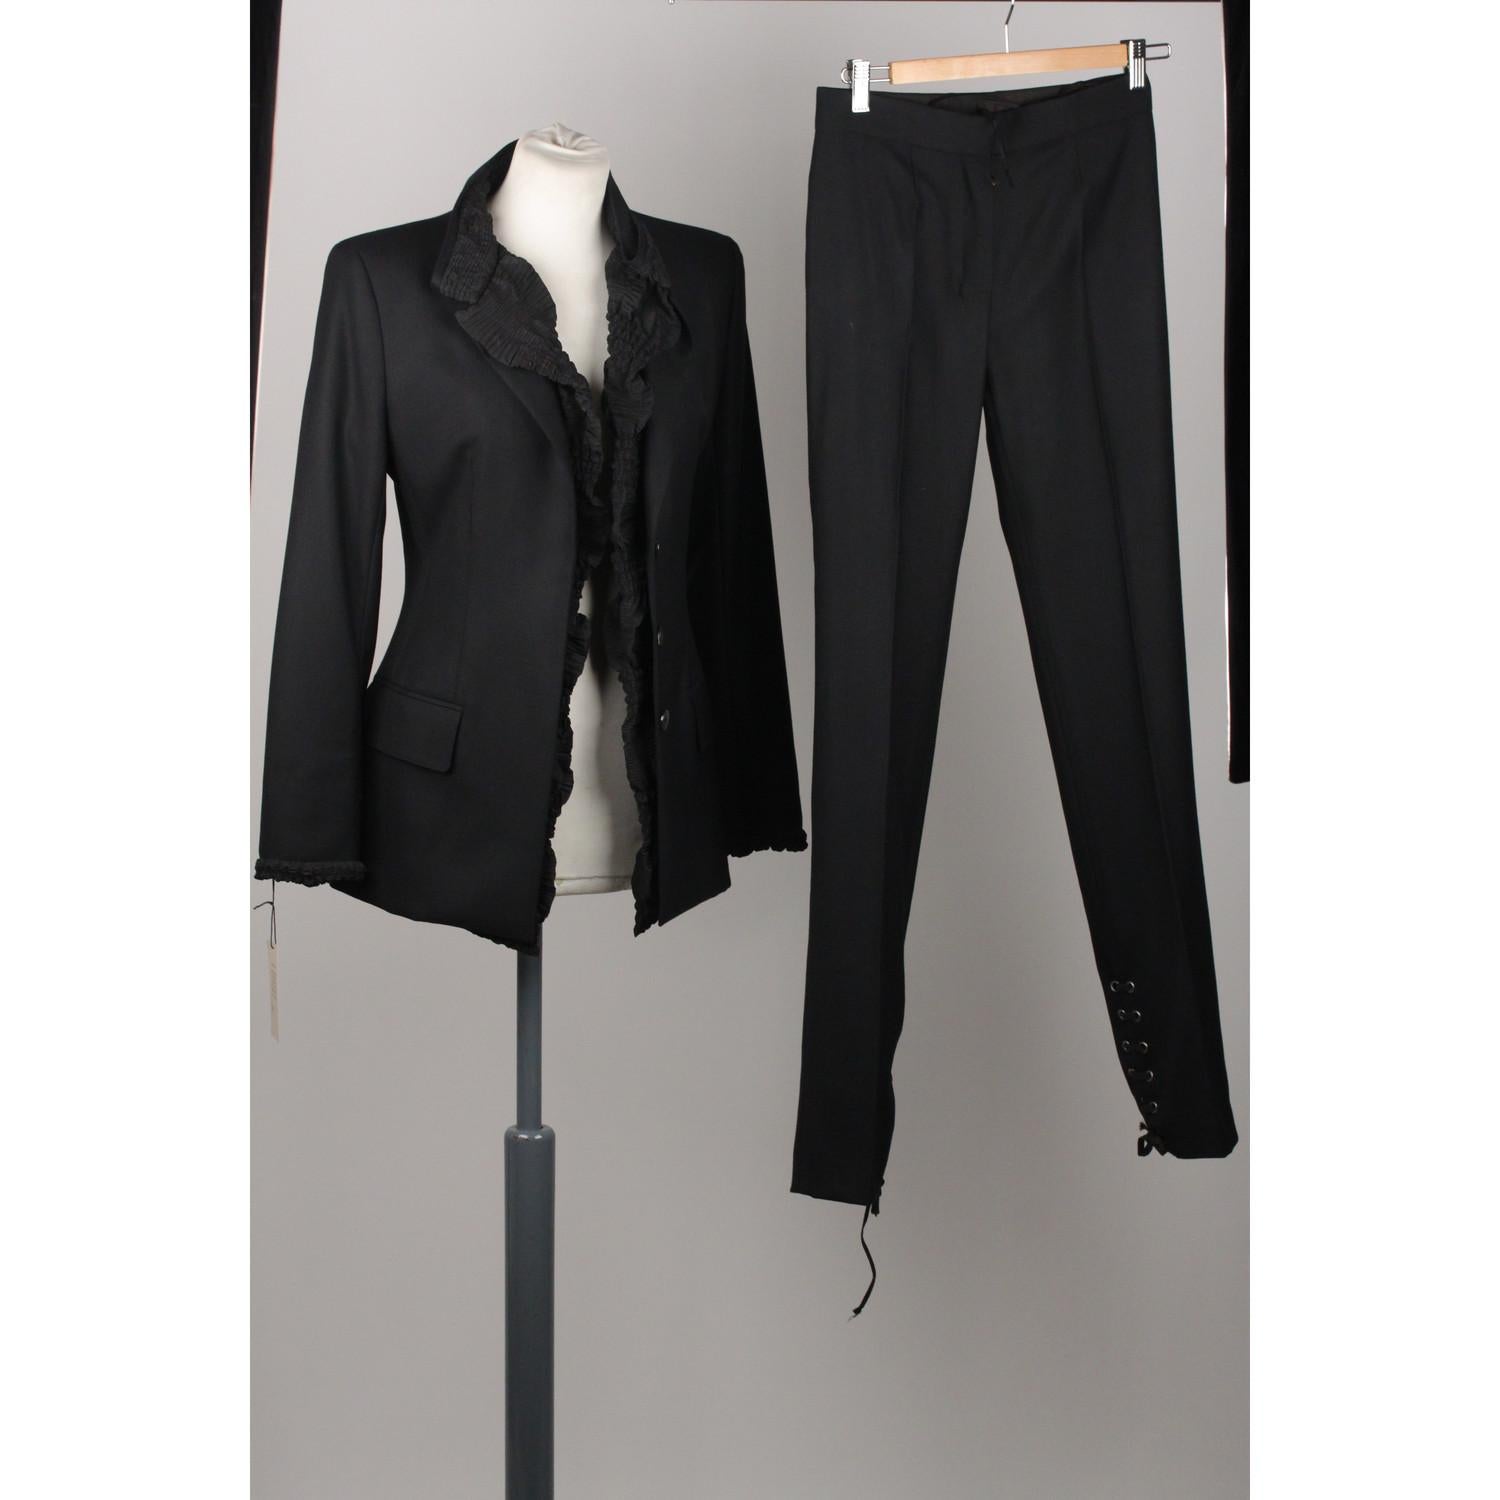 - Pant Suit by YVES SAINT LAURENT Rive Gauche
- Black color
- Ruffle detailing on the front
- Button closure on the front
- Trousers with concelaed hook and bar and zip closure on the front
- Lace-up detailing at the end of the legs
- Composition: